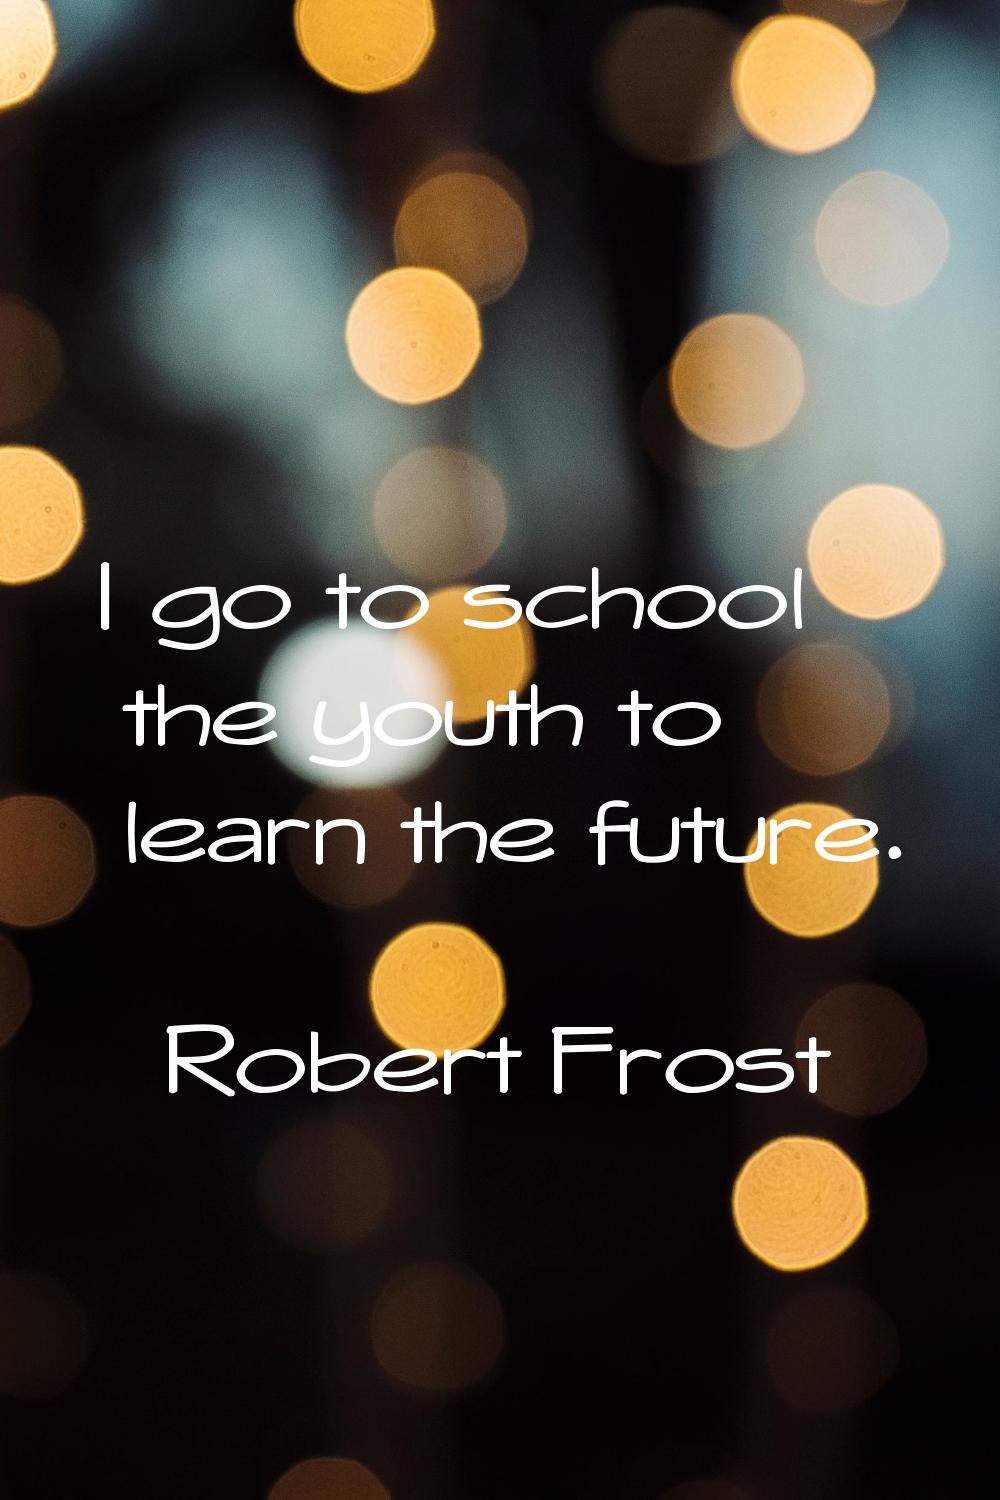 I go to school the youth to learn the future.